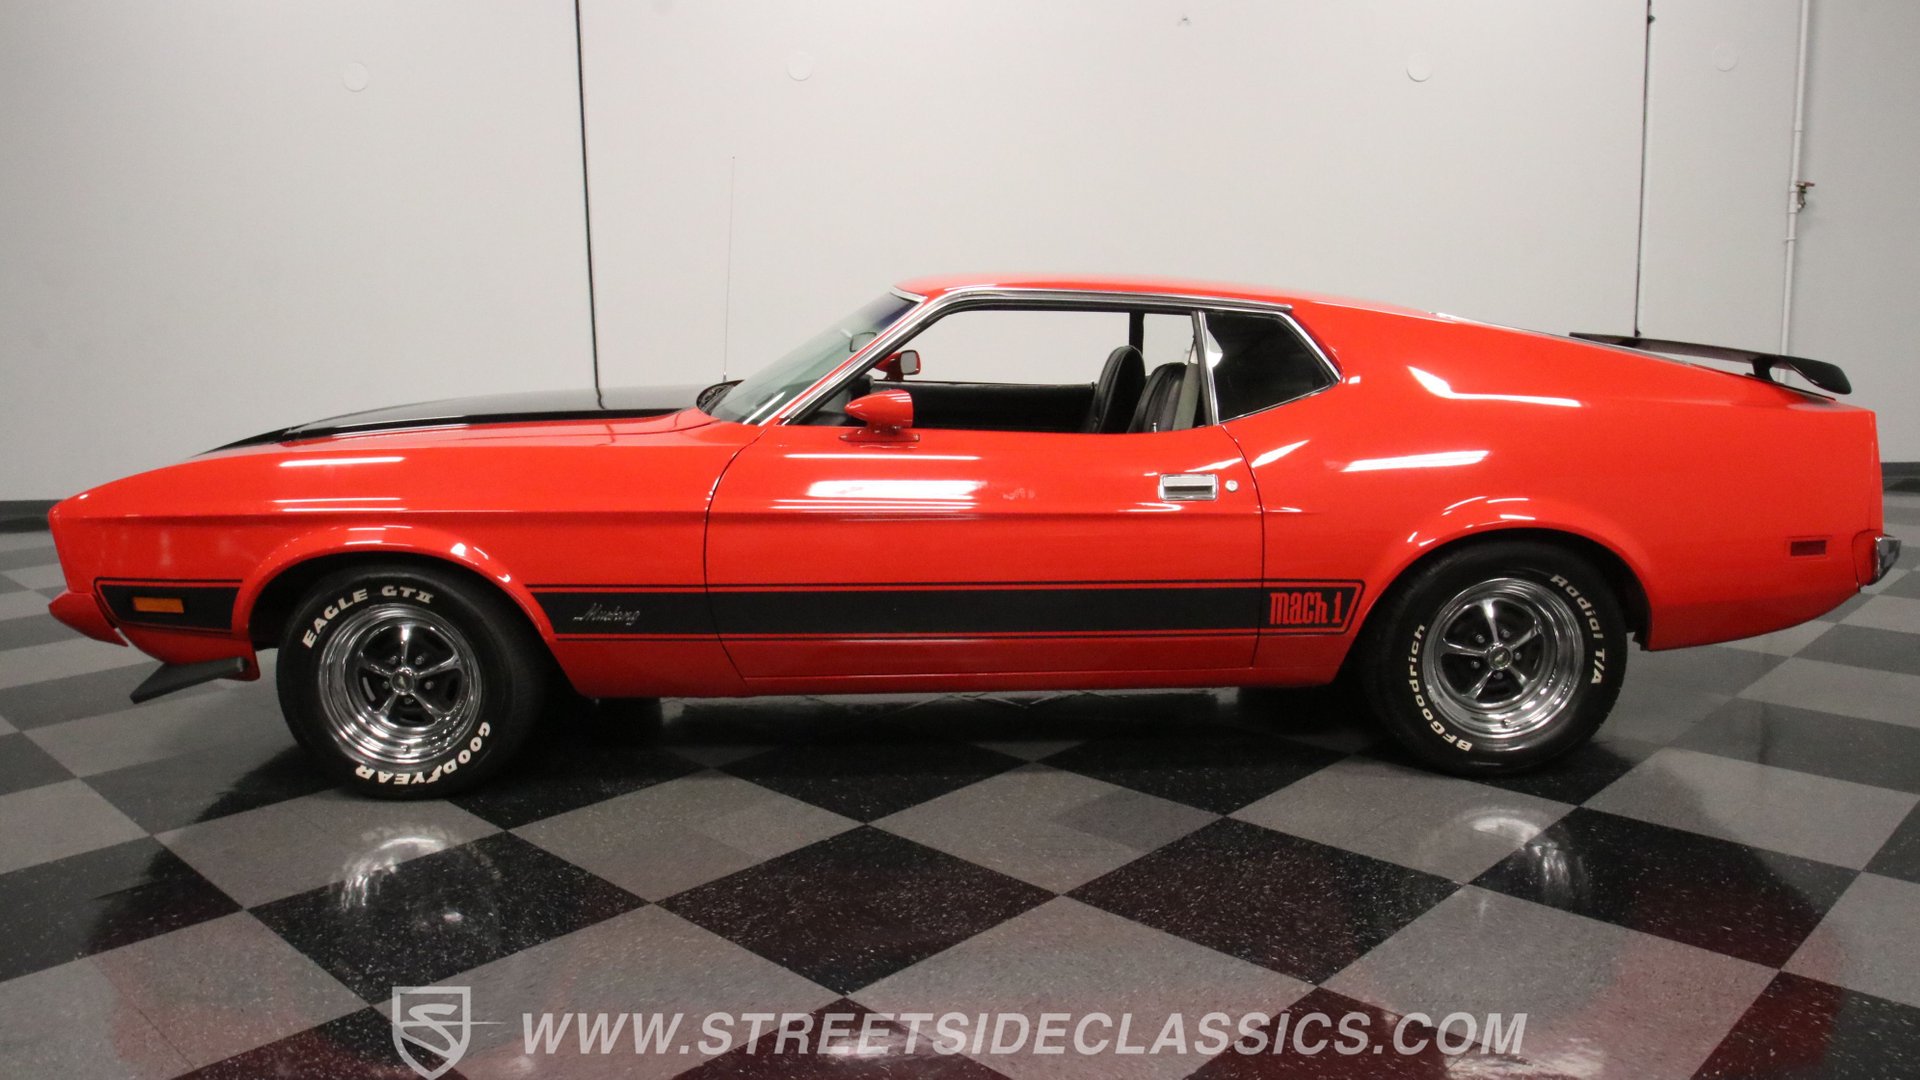 1973 Ford Mustang | Classic Cars for Sale - Streetside Classics